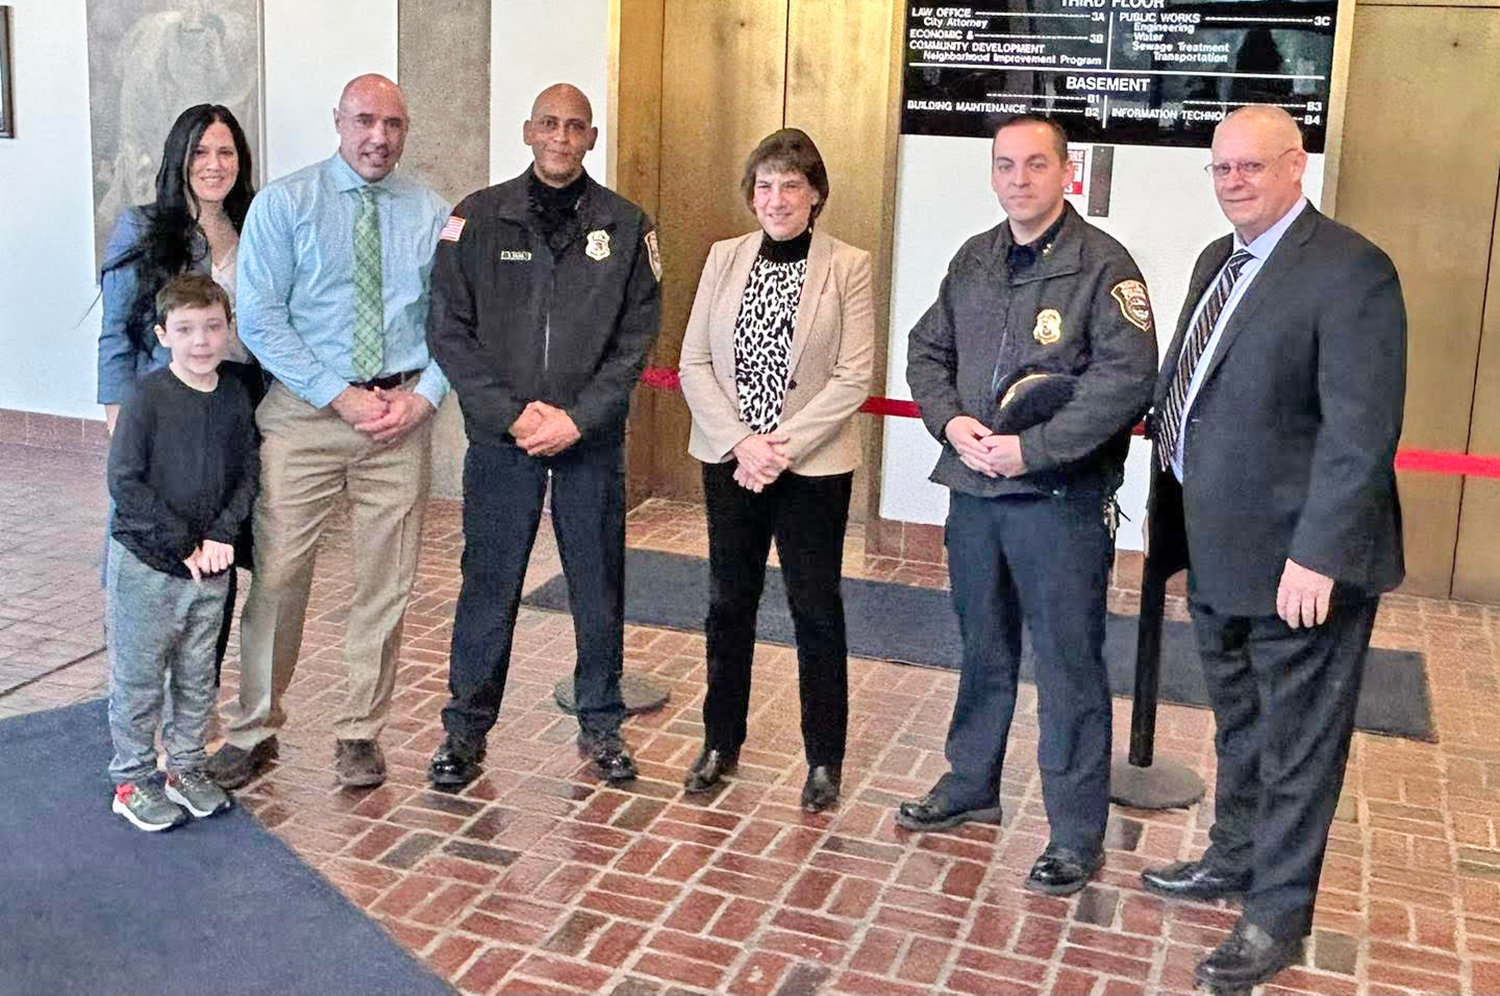 Two new members of the Rome Police Department were sworn in at City Hall on Friday. From left, full-time Patrolman Michael Uhl and his family; Police Chief David J. Collins, Mayor Jacqueline M. Izzo, Deputy Police Chief Cheywnne D. Schoff, and new part-time Patrolman Brian Warcup.